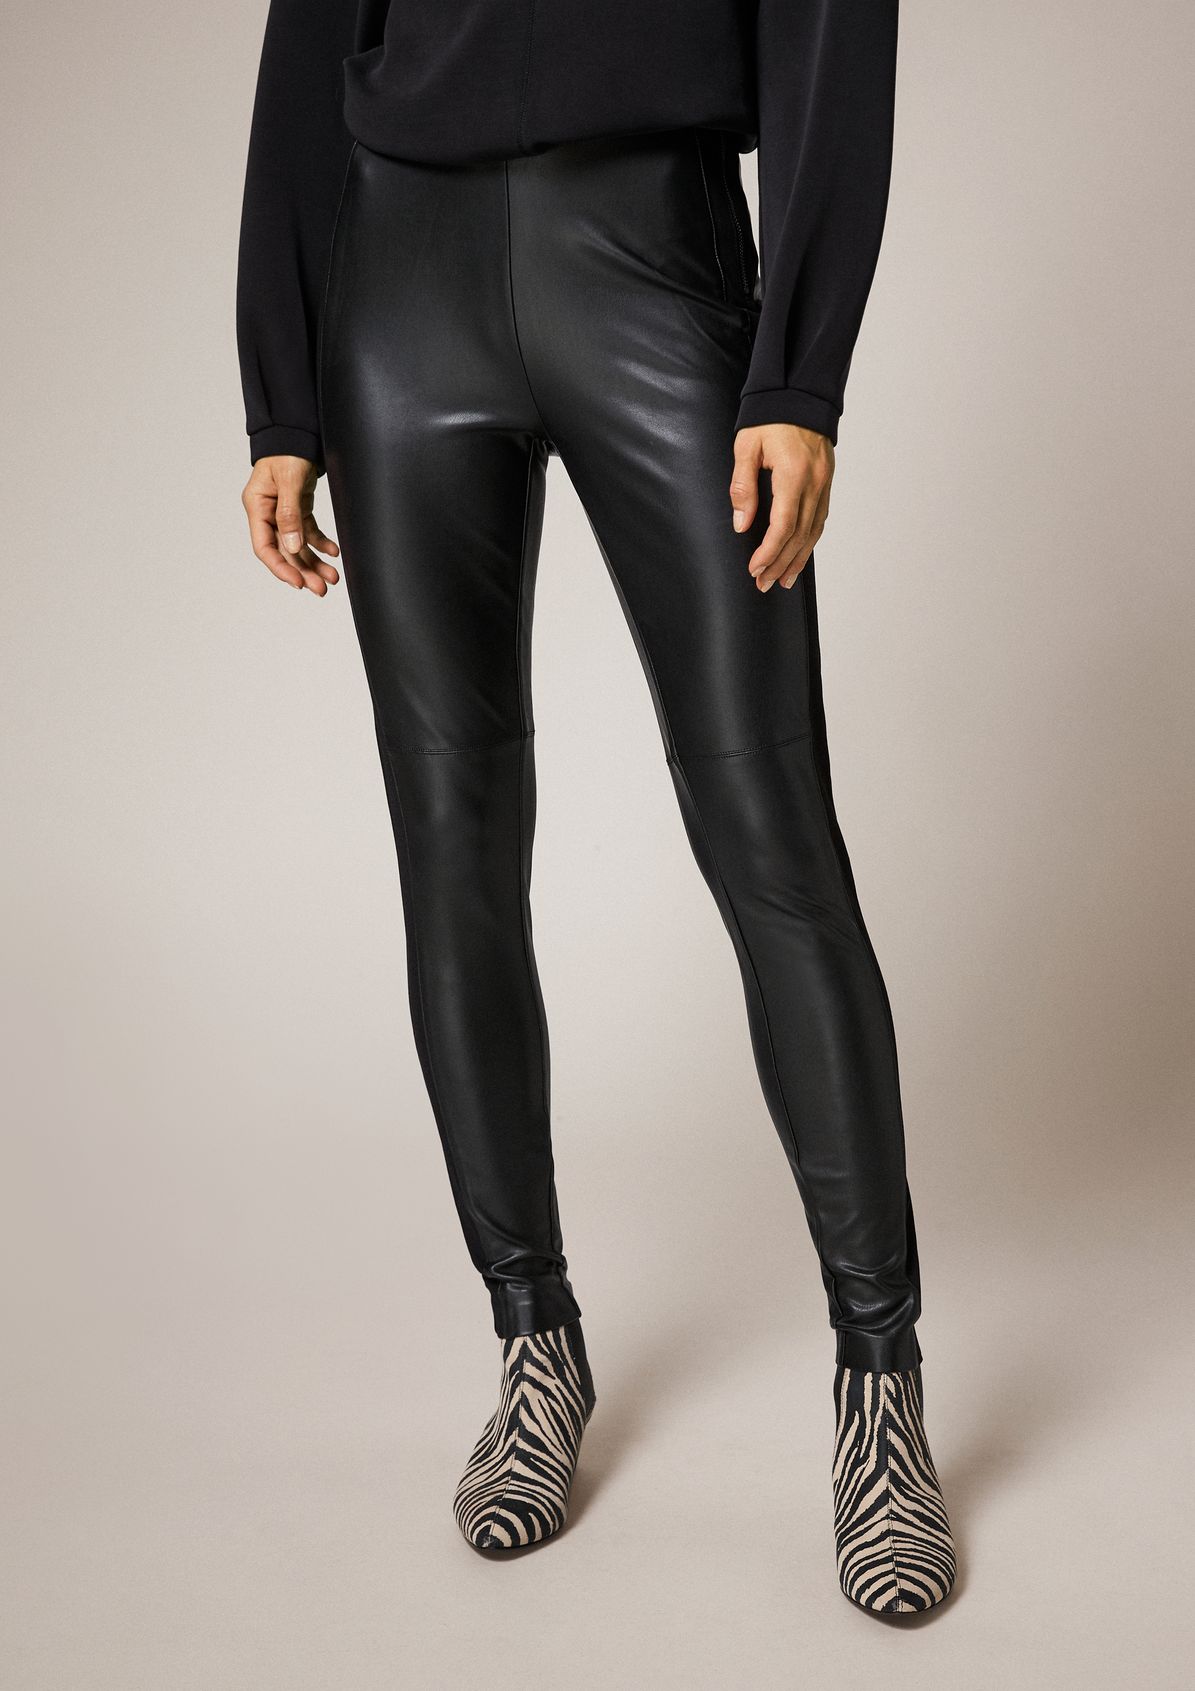 Comma Skinny Faux Leather Leggings, White Leather Tights